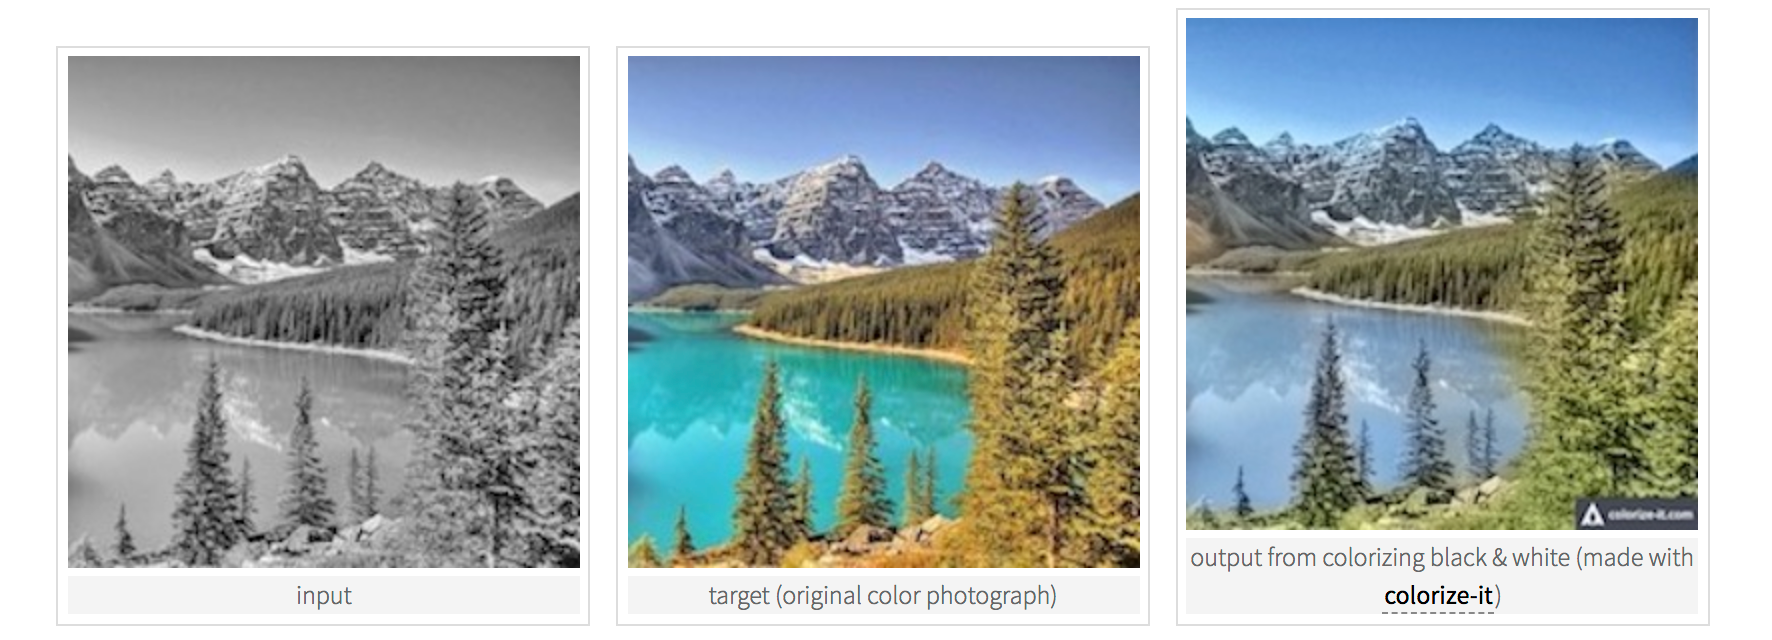 Black and white to color images with Pix2Pix